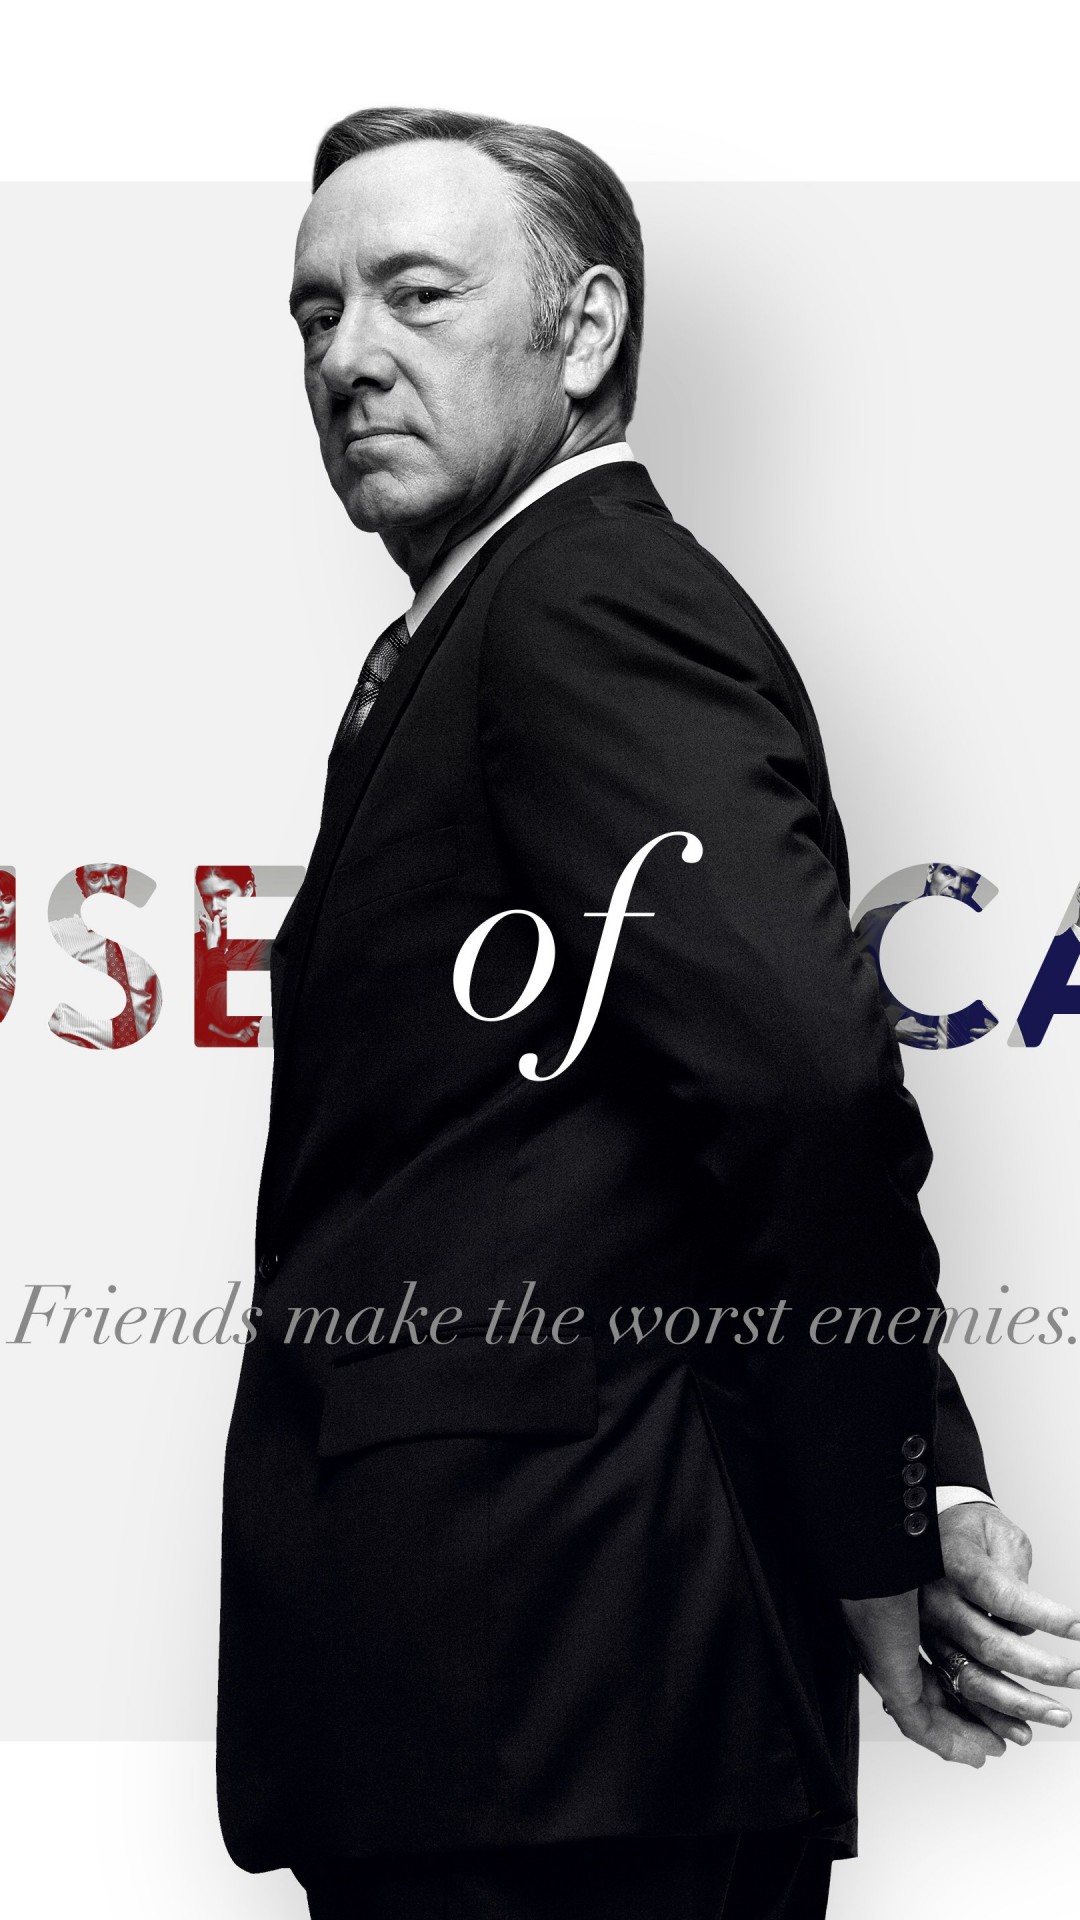 Frank Underwood - House of Cards Wallpaper for SAMSUNG Galaxy Note 3